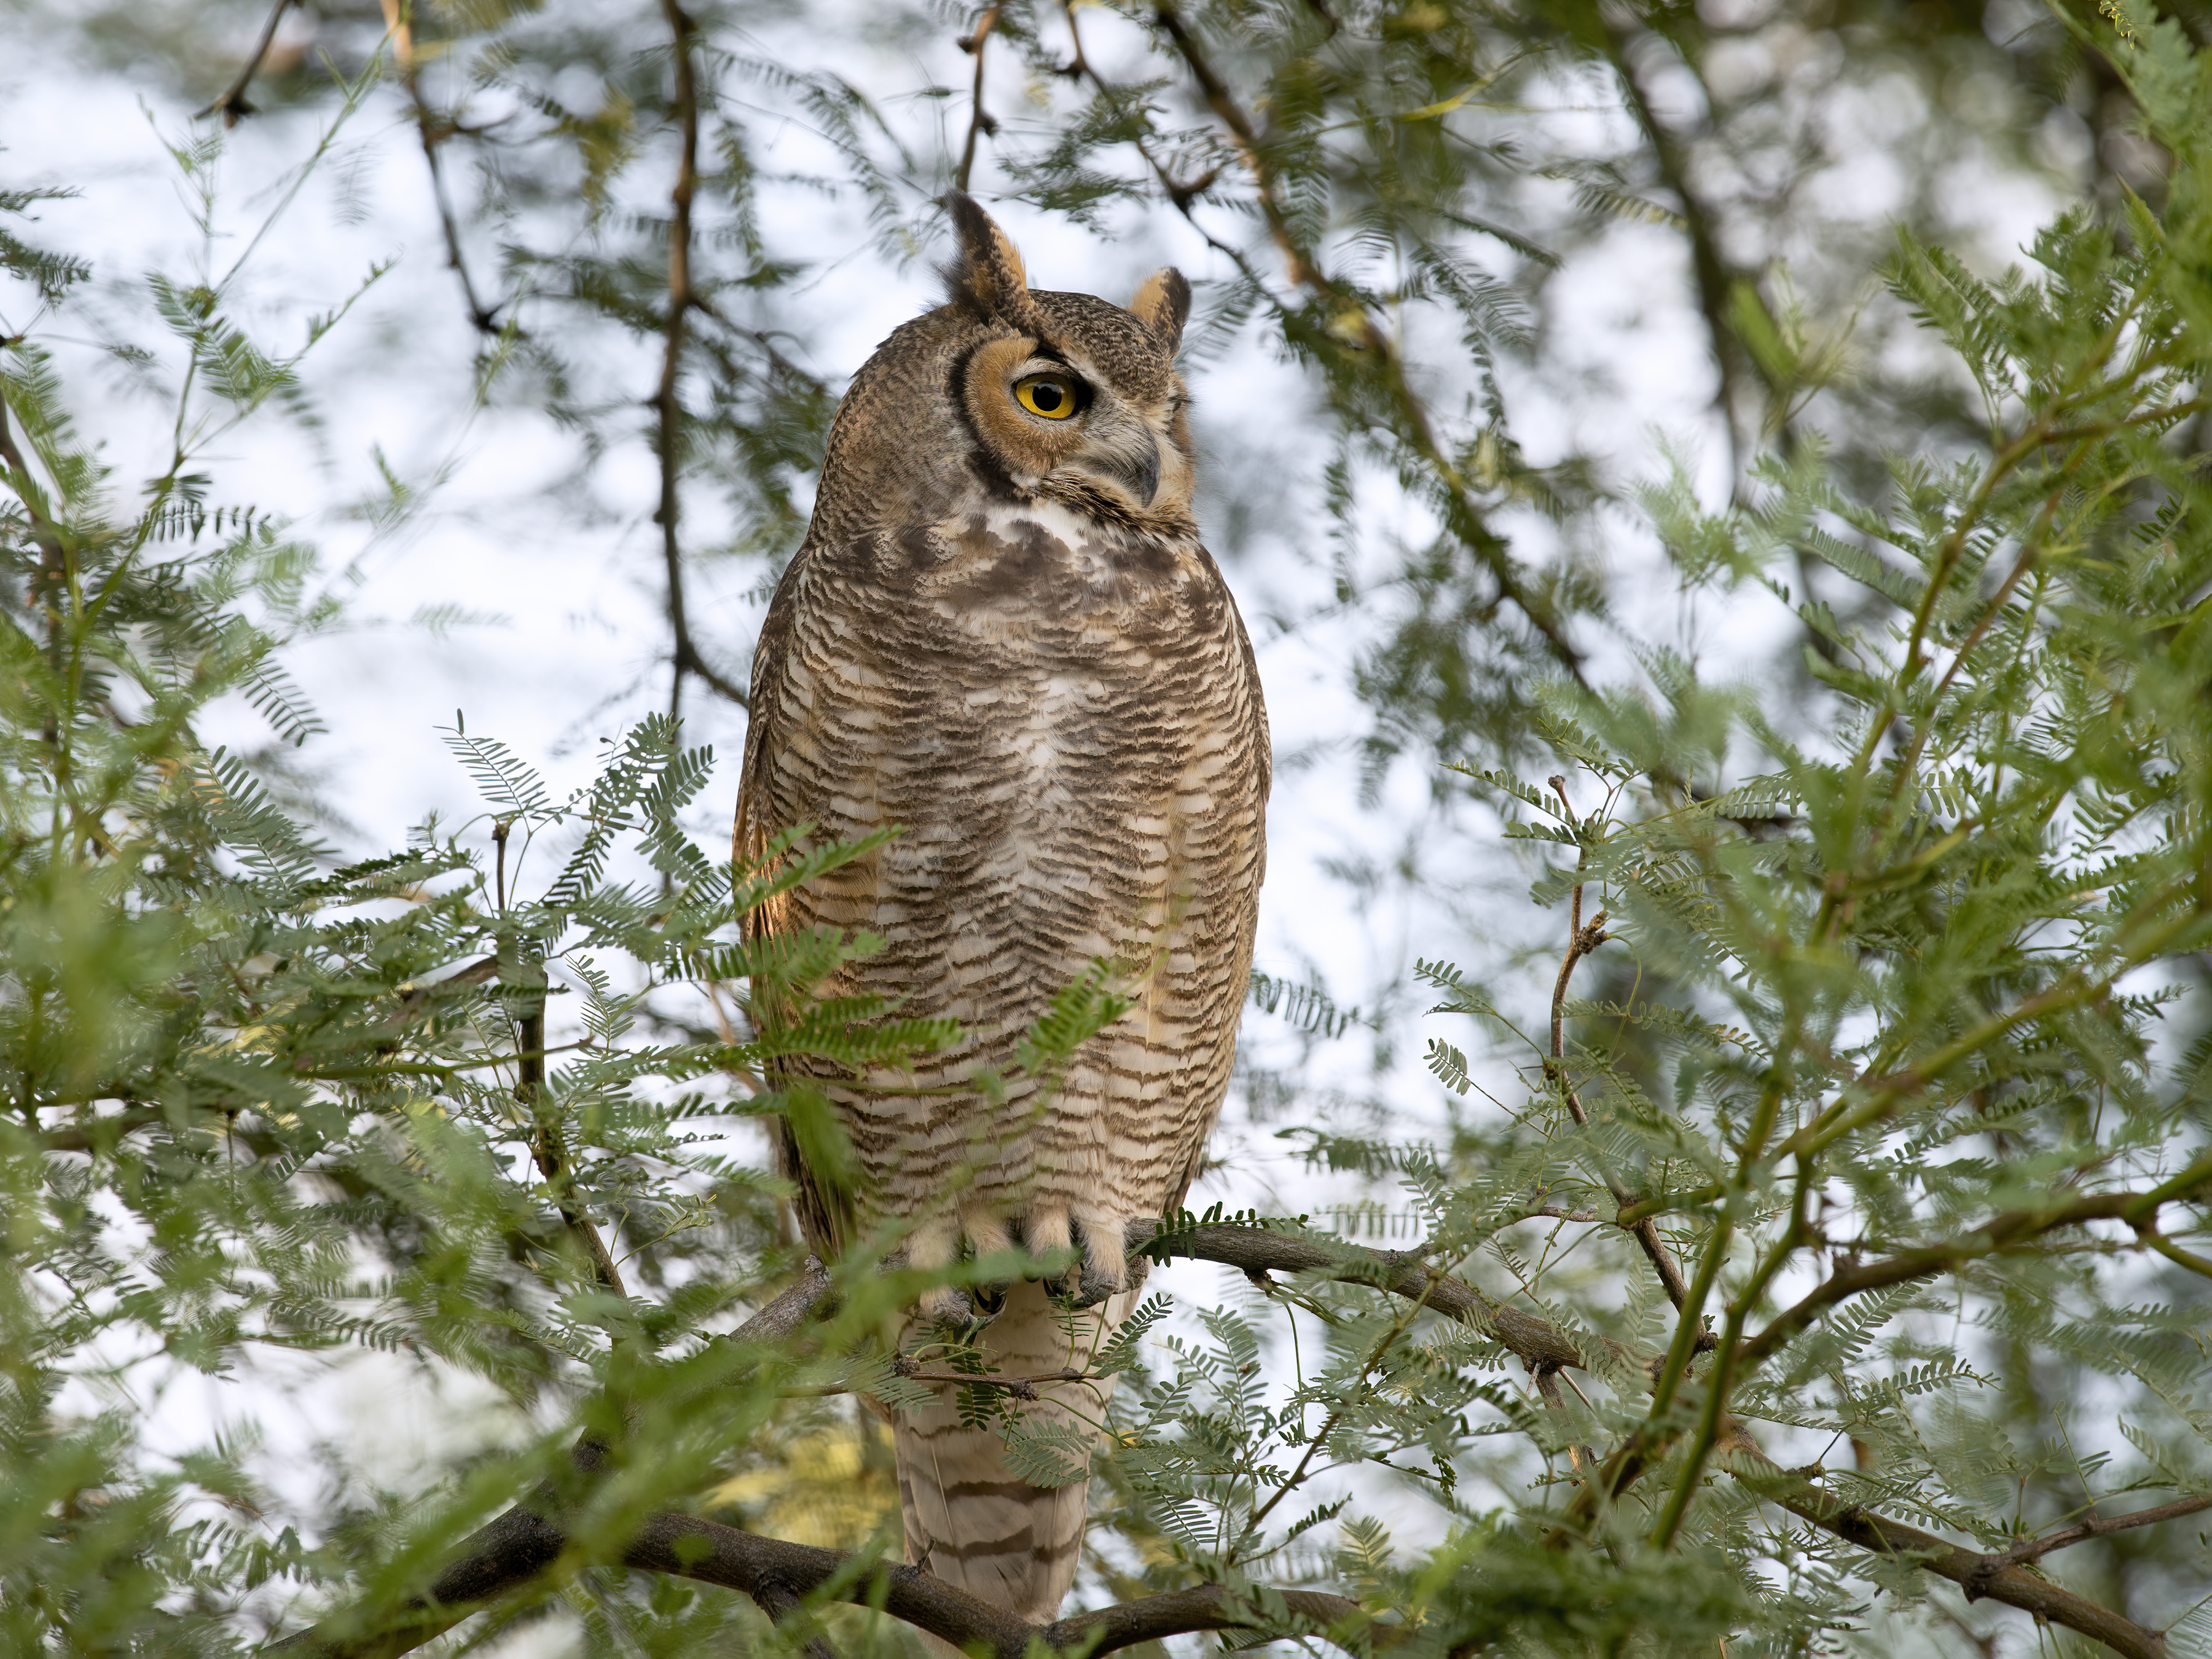 Photo by David C Ring  |  This Great Horned Owl had taken up residence in a very tall Chilean mesquite tree on our property. Near evening it flew down to a much smaller native mesquite to prepare for its evening hunt. This allowed me to use a relatively short telephoto lens for many photos before it flew off again.